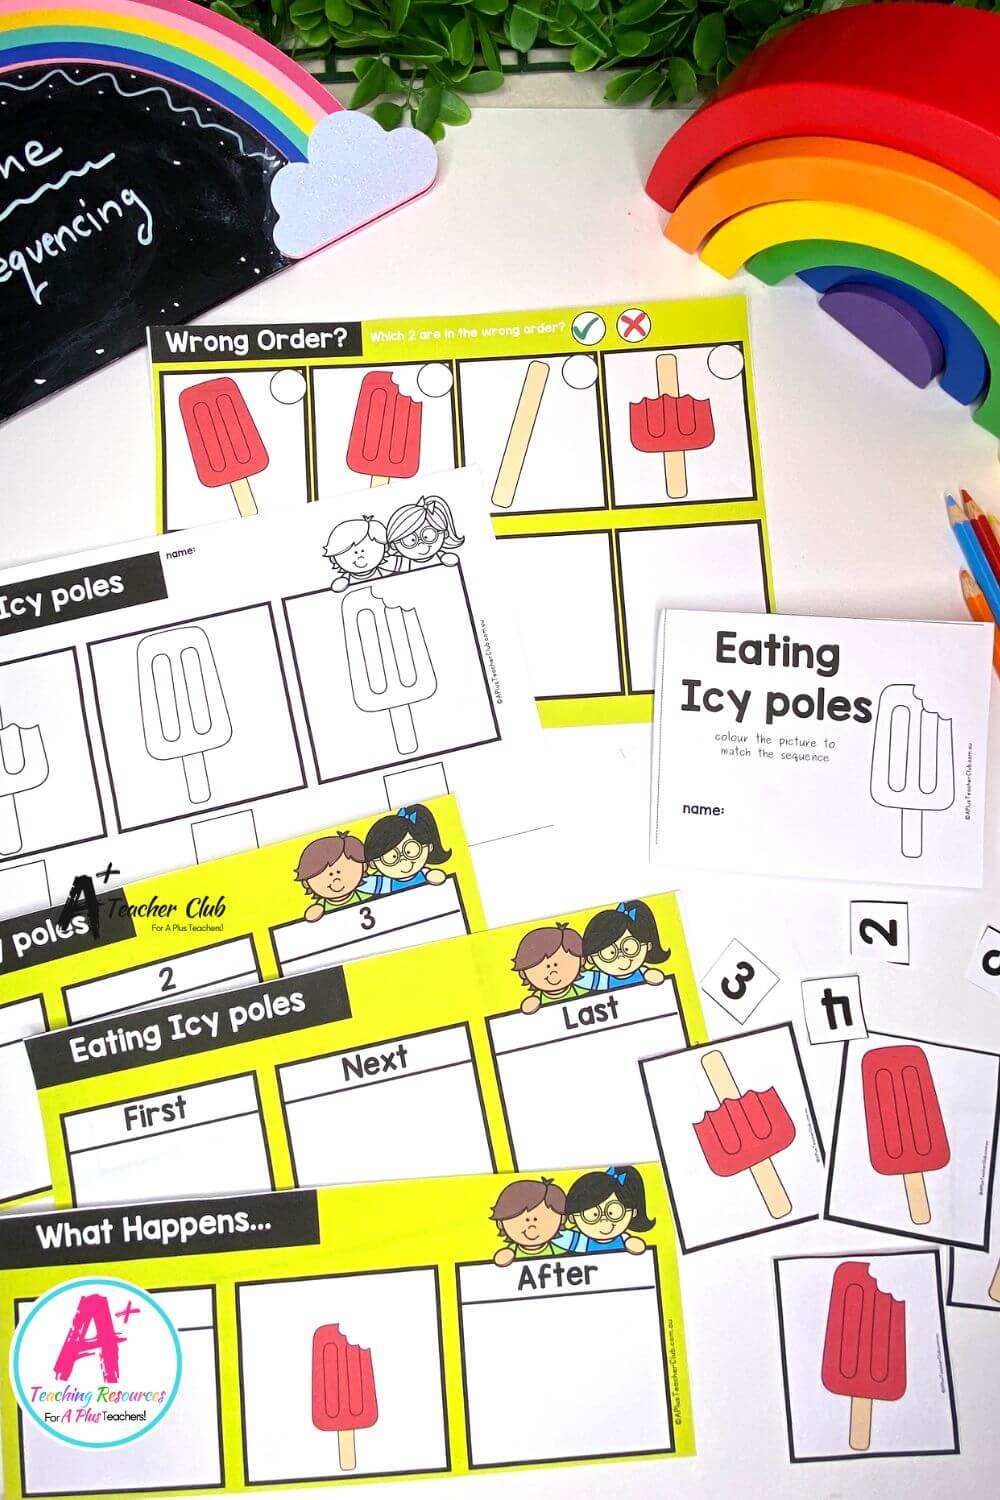 3-Step Sequencing Everyday Events - Eat An Icy Pole Activities Pack